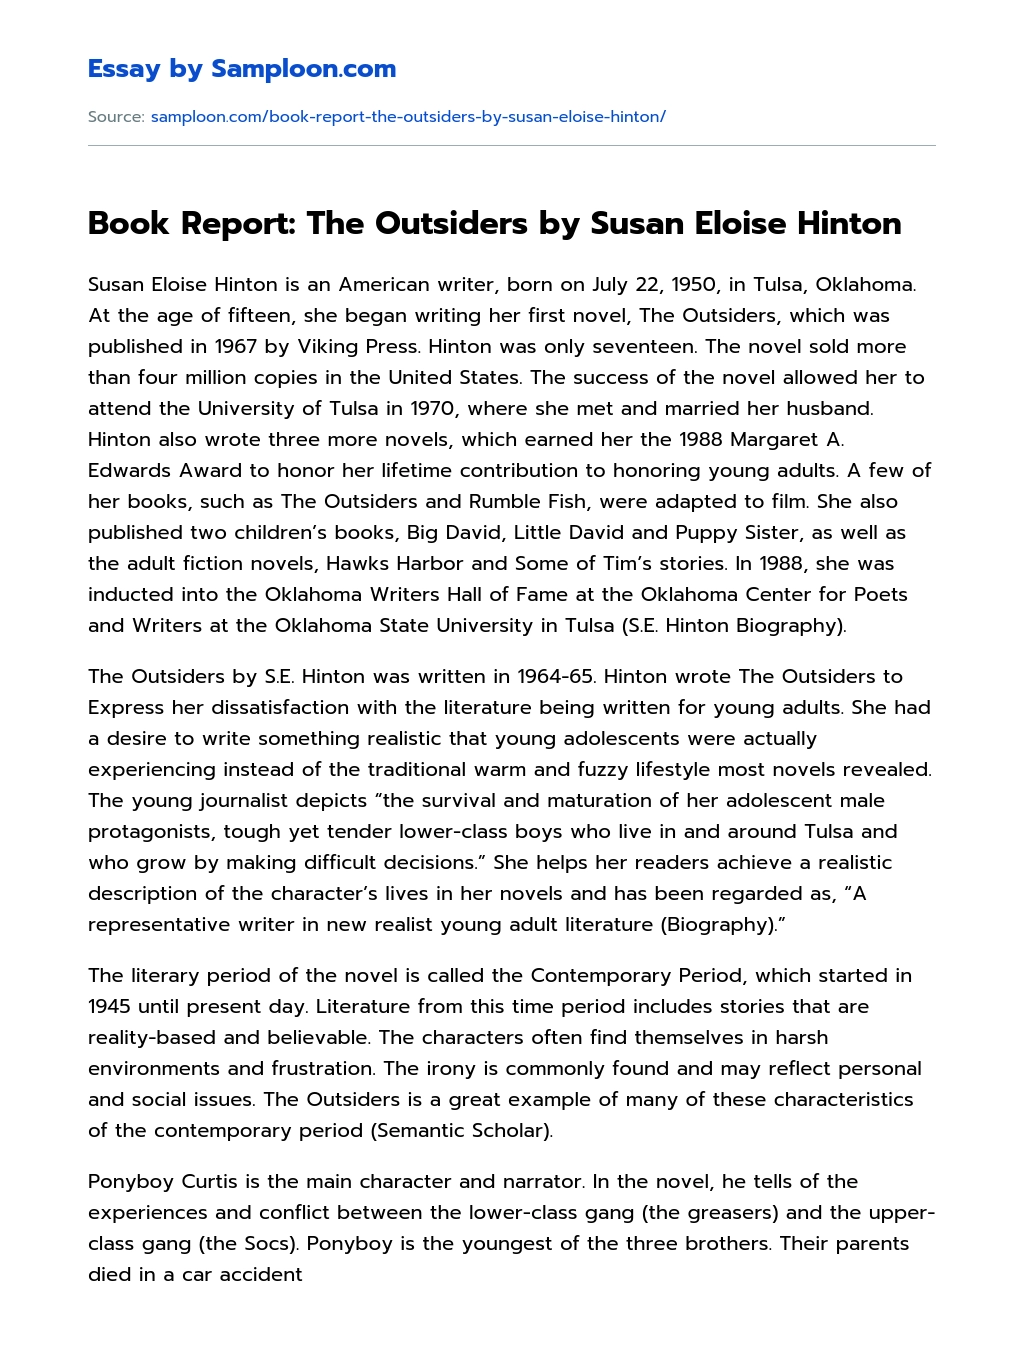 Book Report: The Outsiders by Susan Eloise Hinton essay